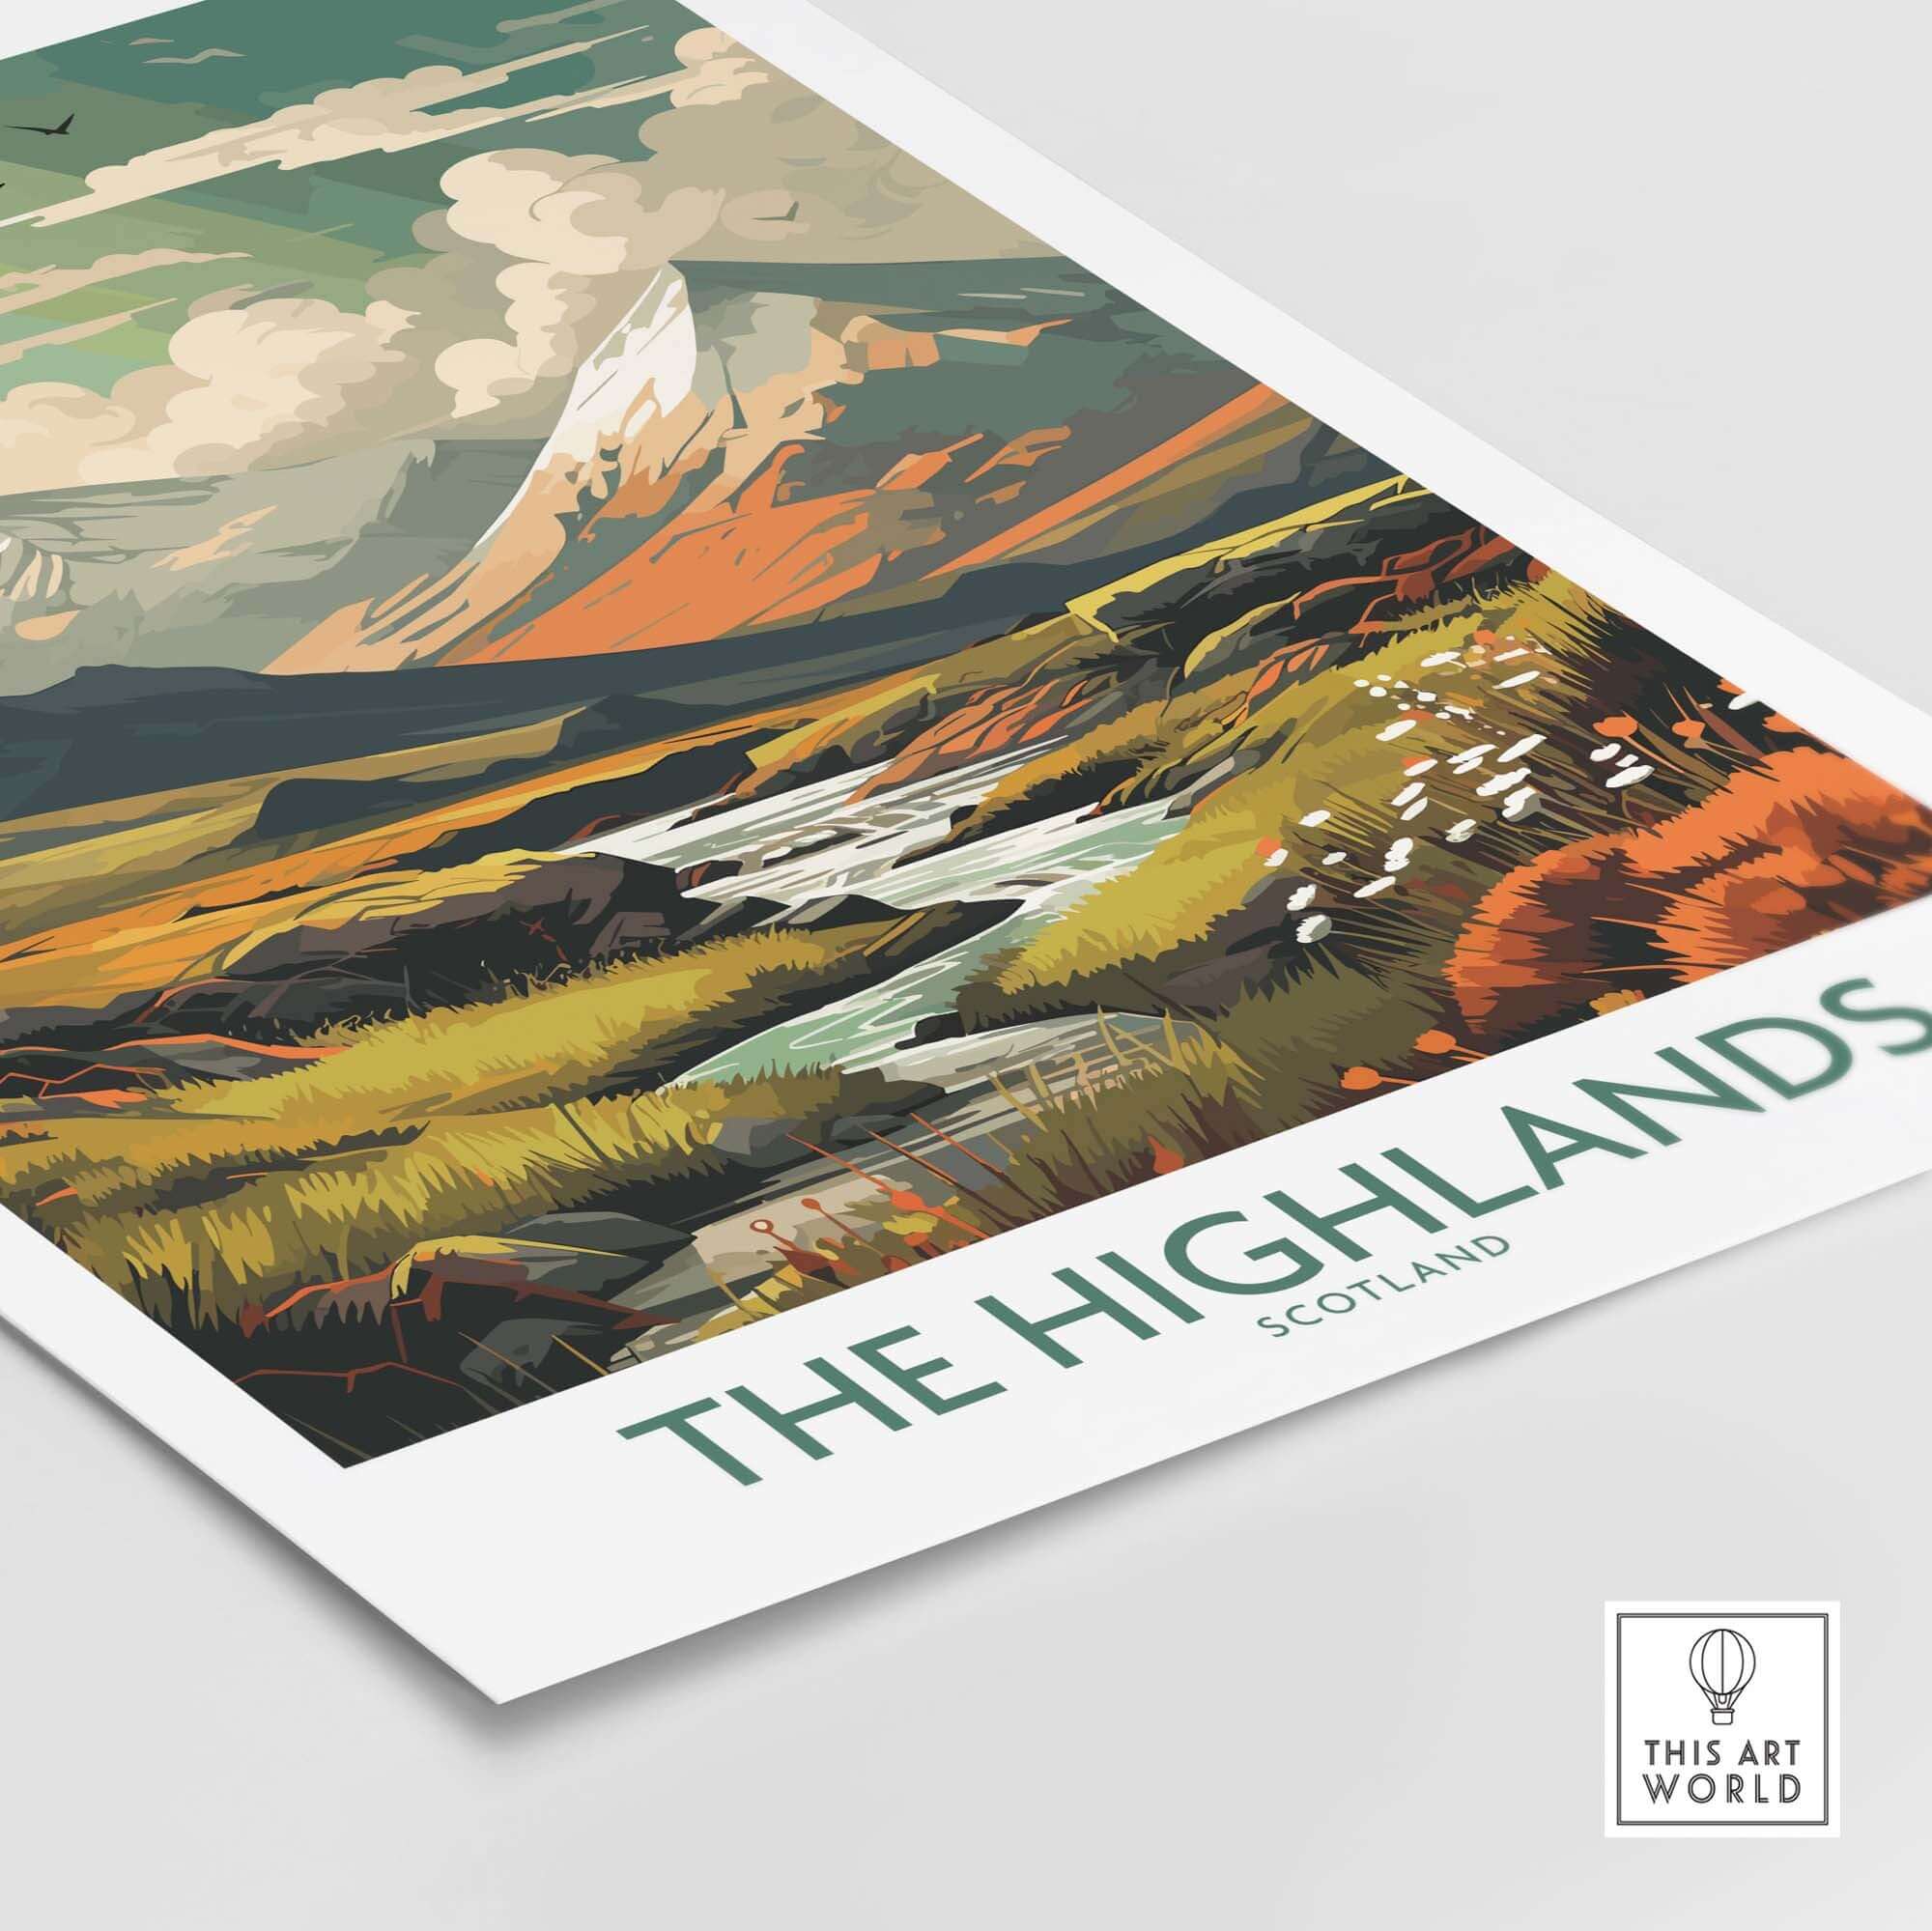 A3 size Art Print of The Highlands in Scotland - Modern Style Travel Poster